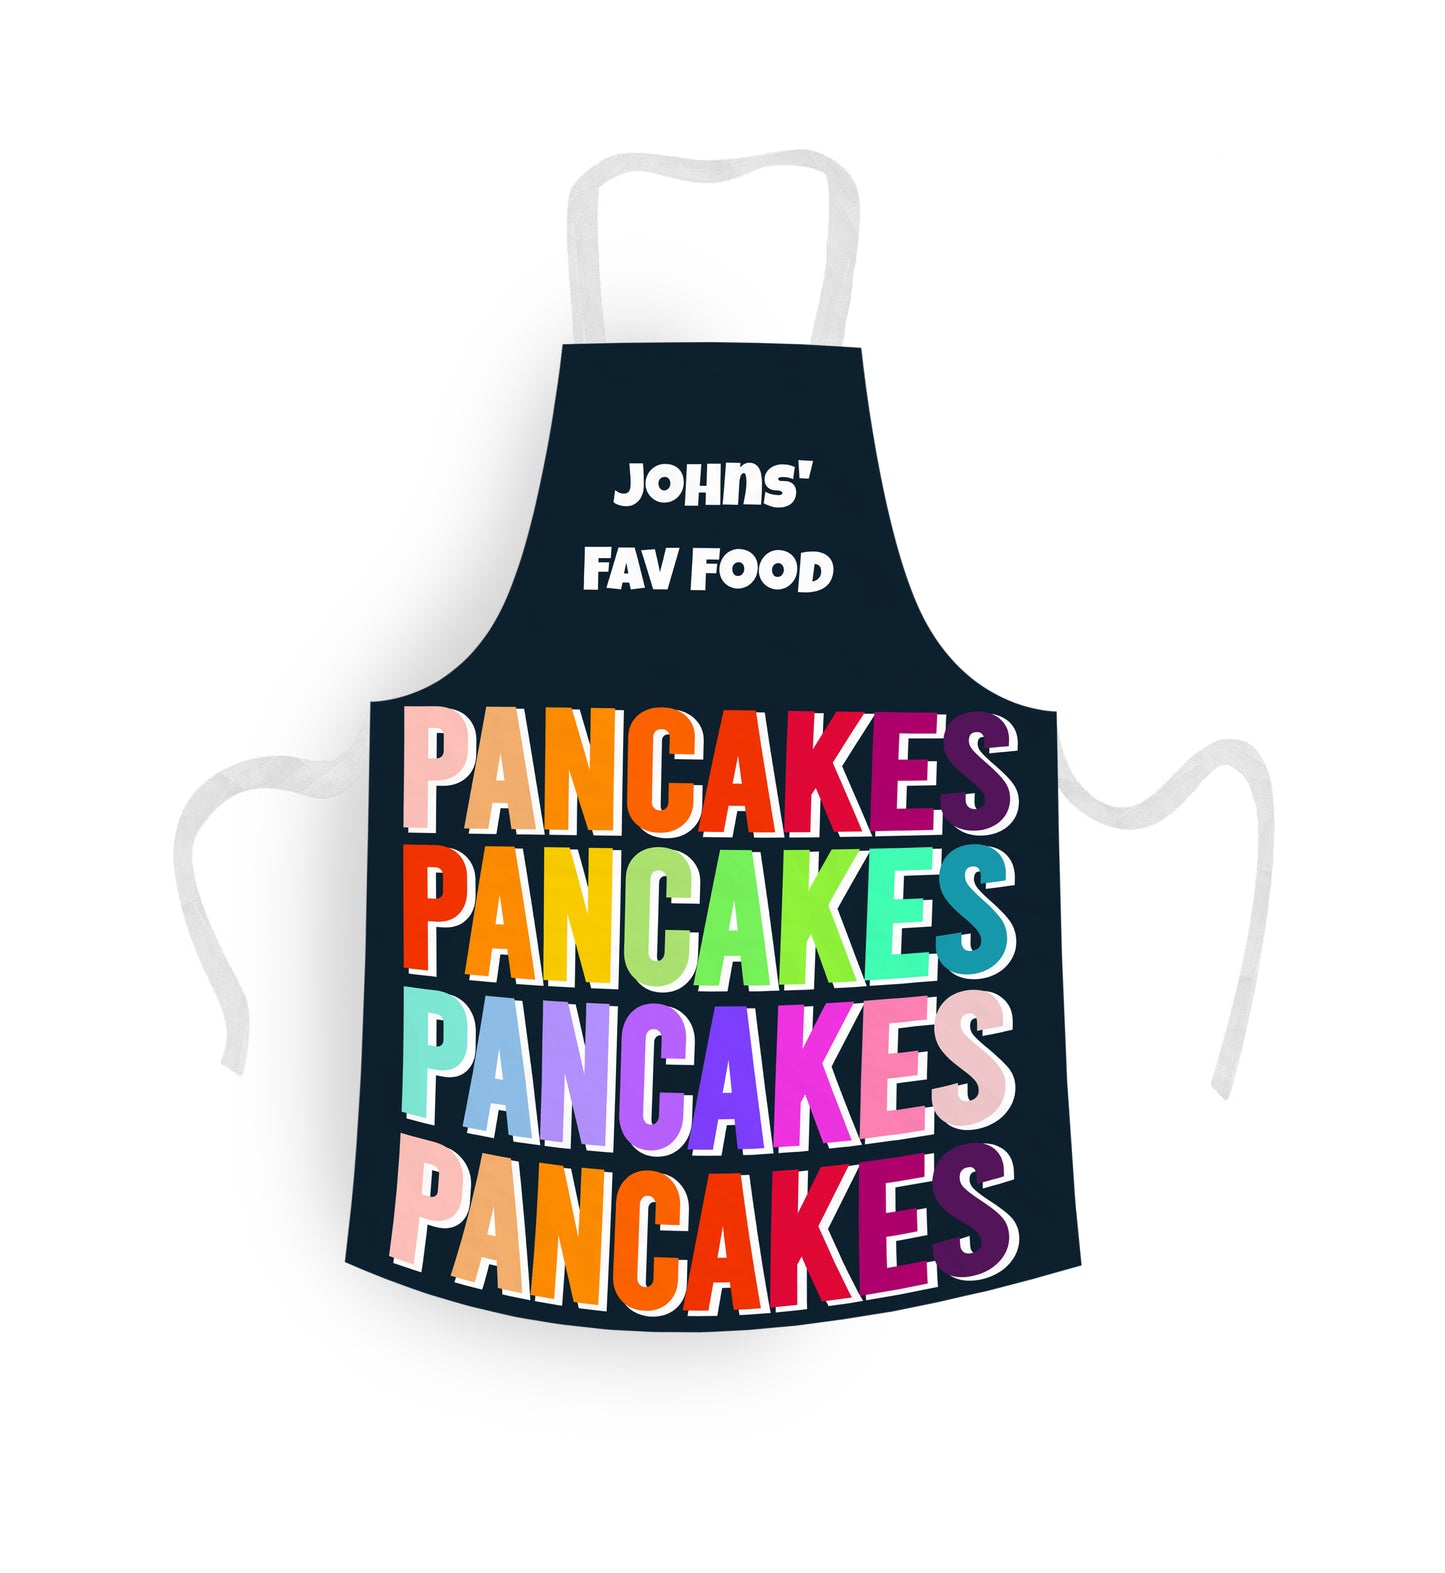 Personalised Apron for Pancake Day. Added text on it is Johns' Fav Food. Pancakes Pancakes Pancakes.